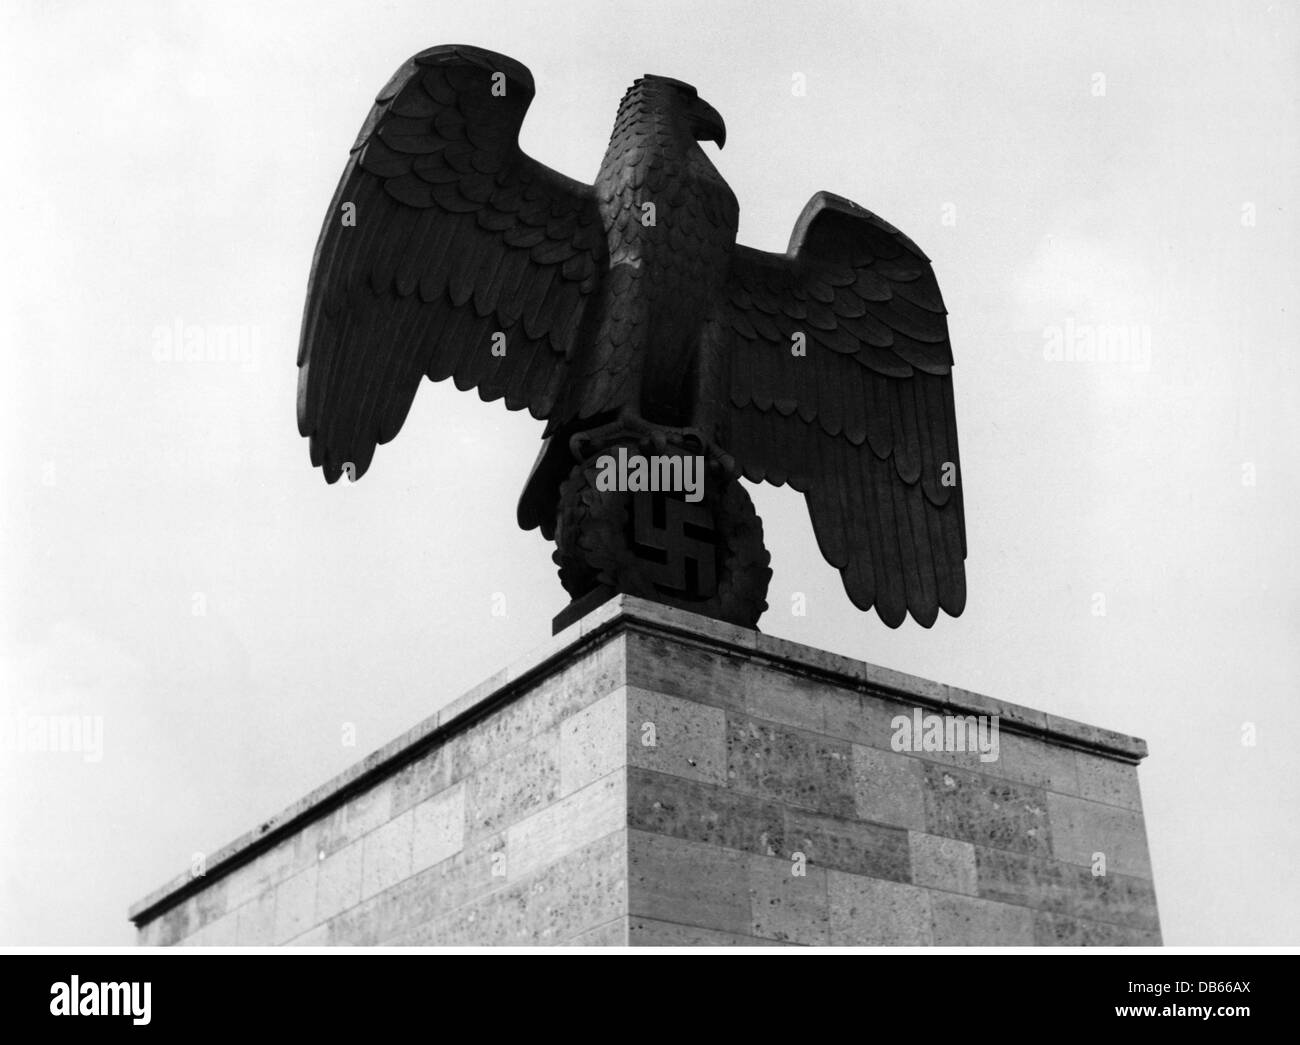 National Socialism / Nazism, 1933 - 1945, emblems, Reichsadler (imperial eagle), swastika eagle on the Nazi party rally grounds at Nuremberg, 1930s, Additional-Rights-Clearences-Not Available Stock Photo